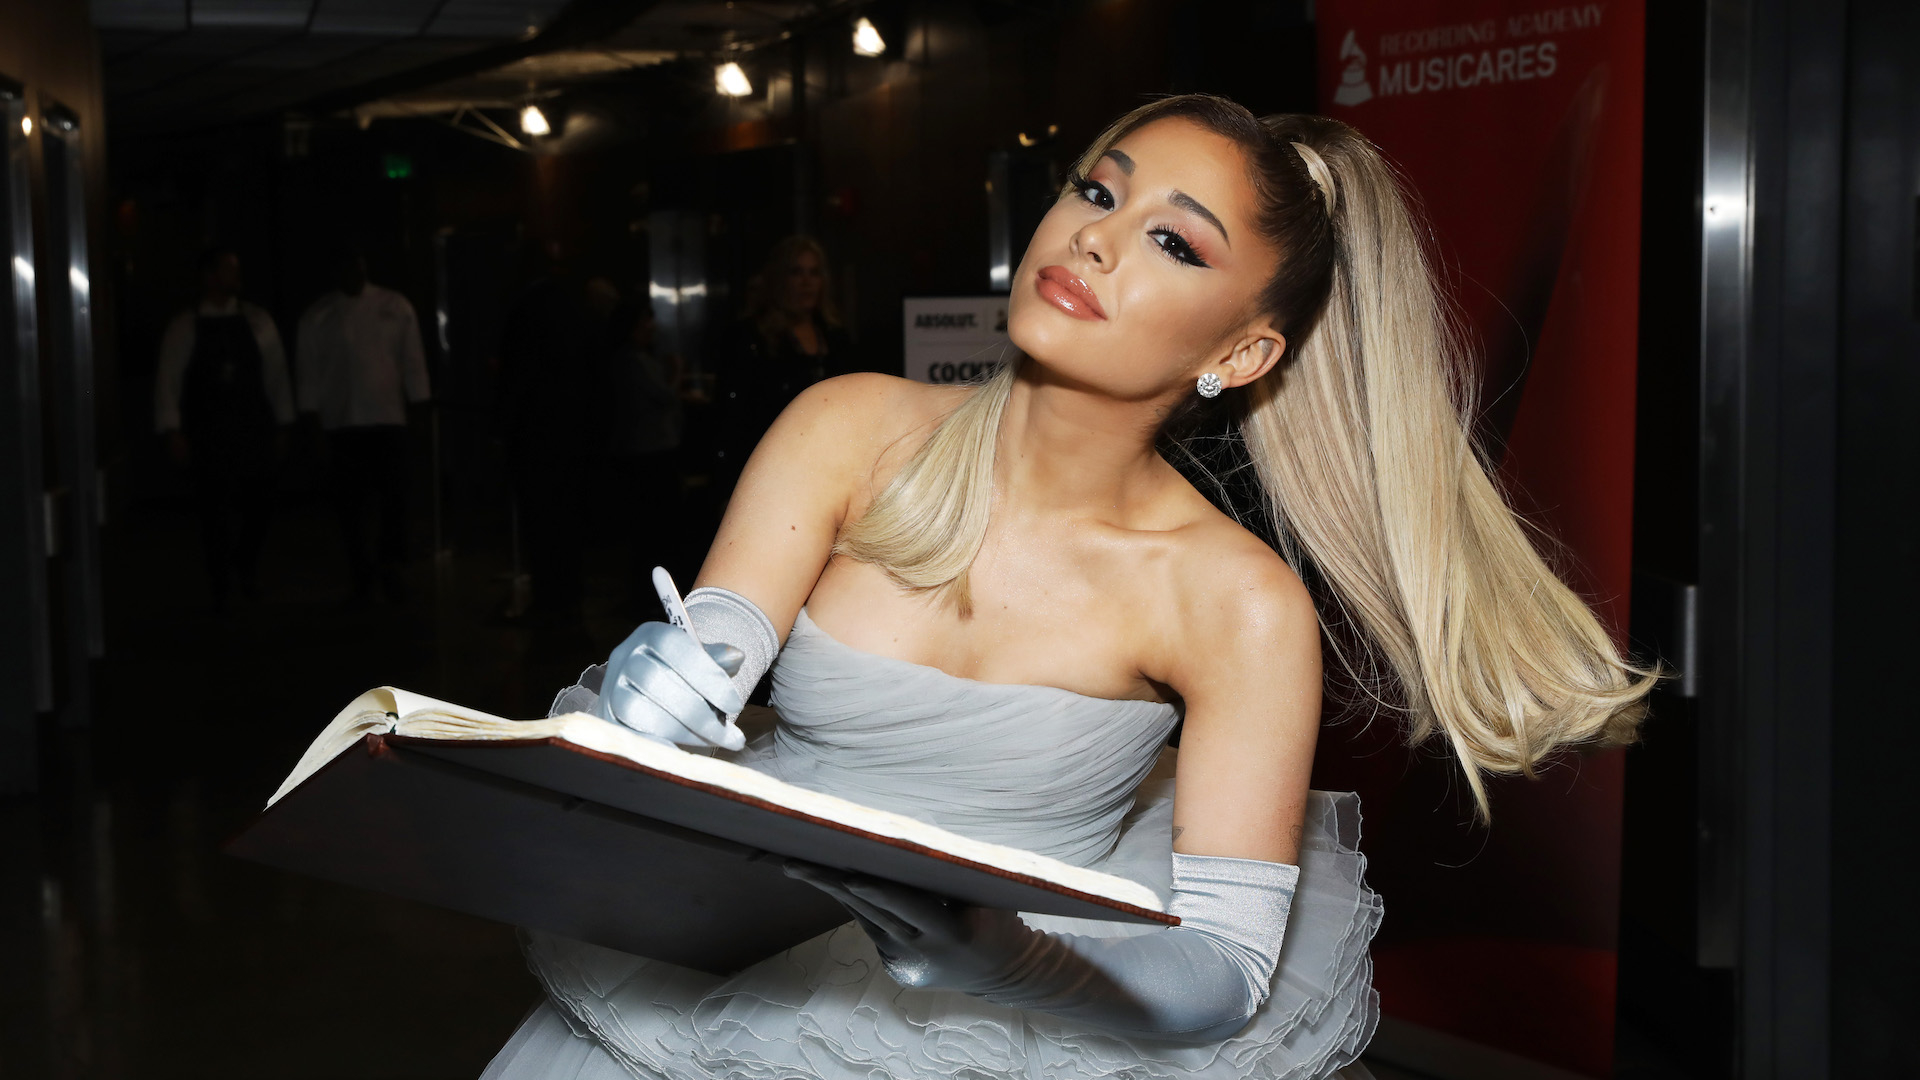 Ariana Grande's 'secret' album has nothing to do with her - BBC News